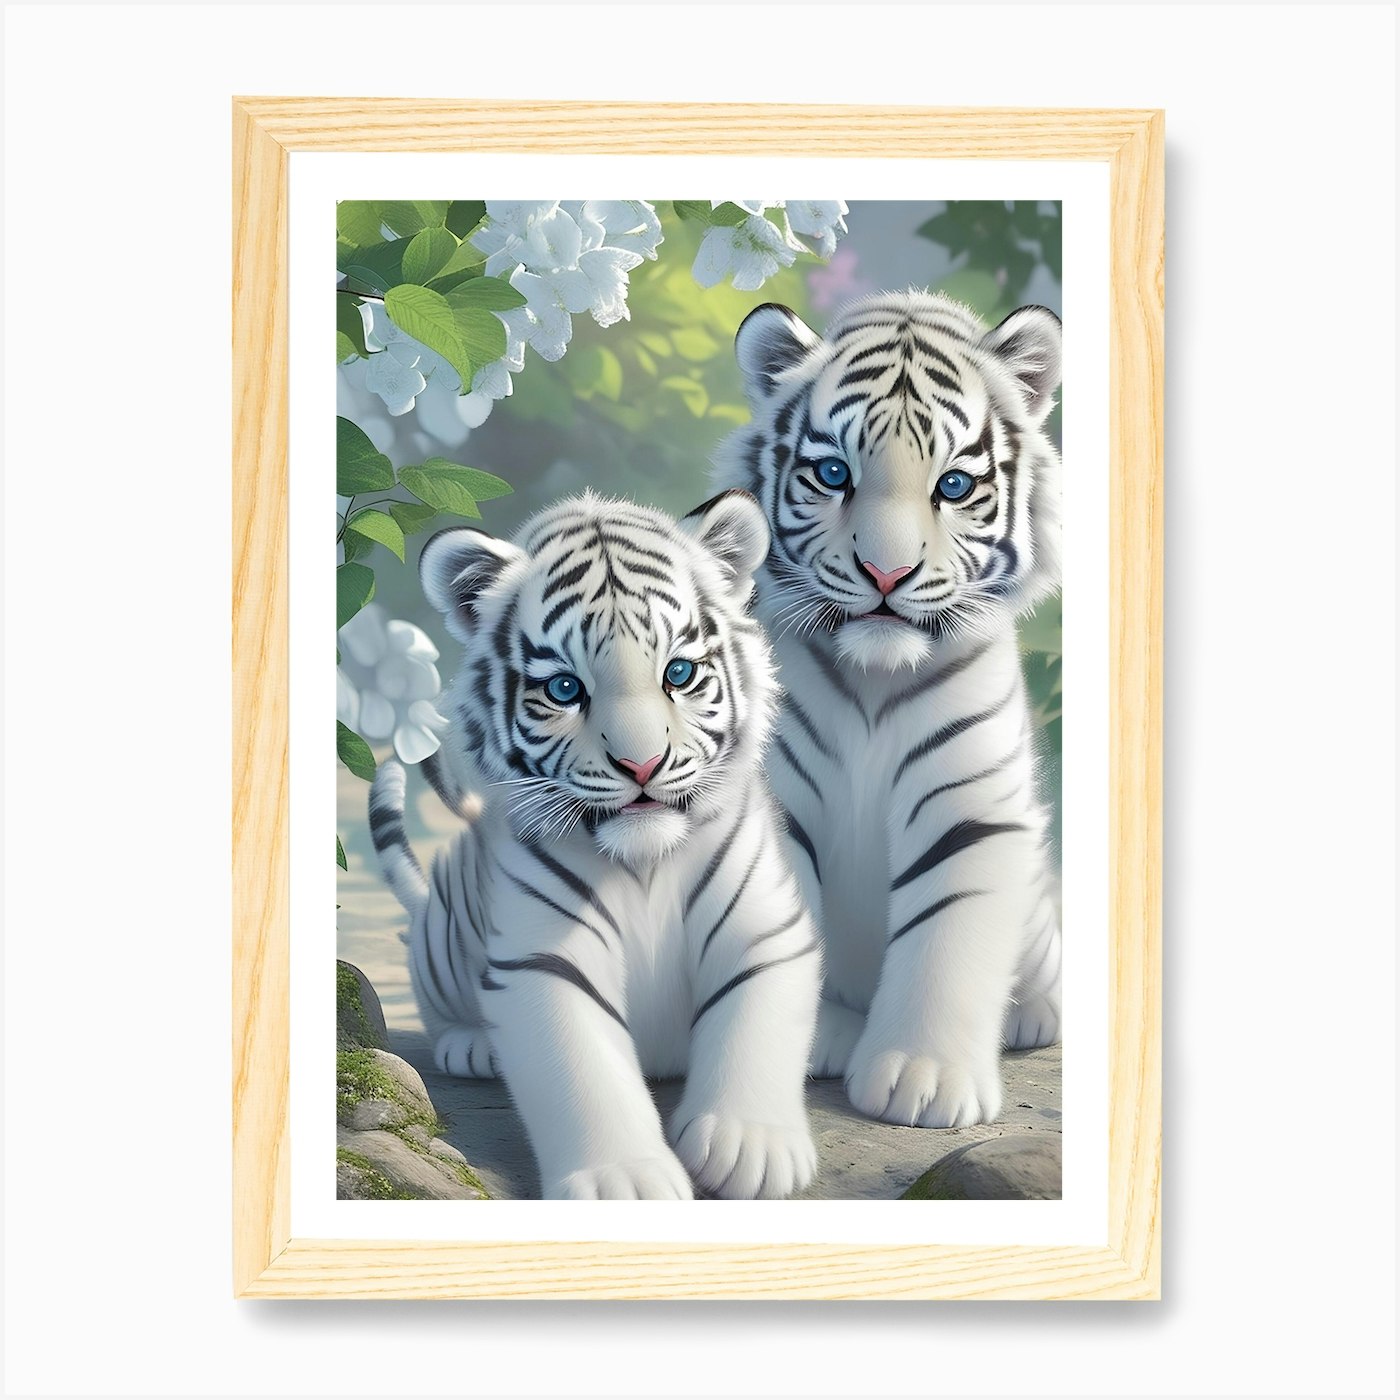 Crystal Art Loving Embrace Framed DIY Diamond Painting Craft Kit, White  Mama Tiger & Cub On Pre-Mounted On Stretched Canvas Wood Frame, XL Size: 65  X